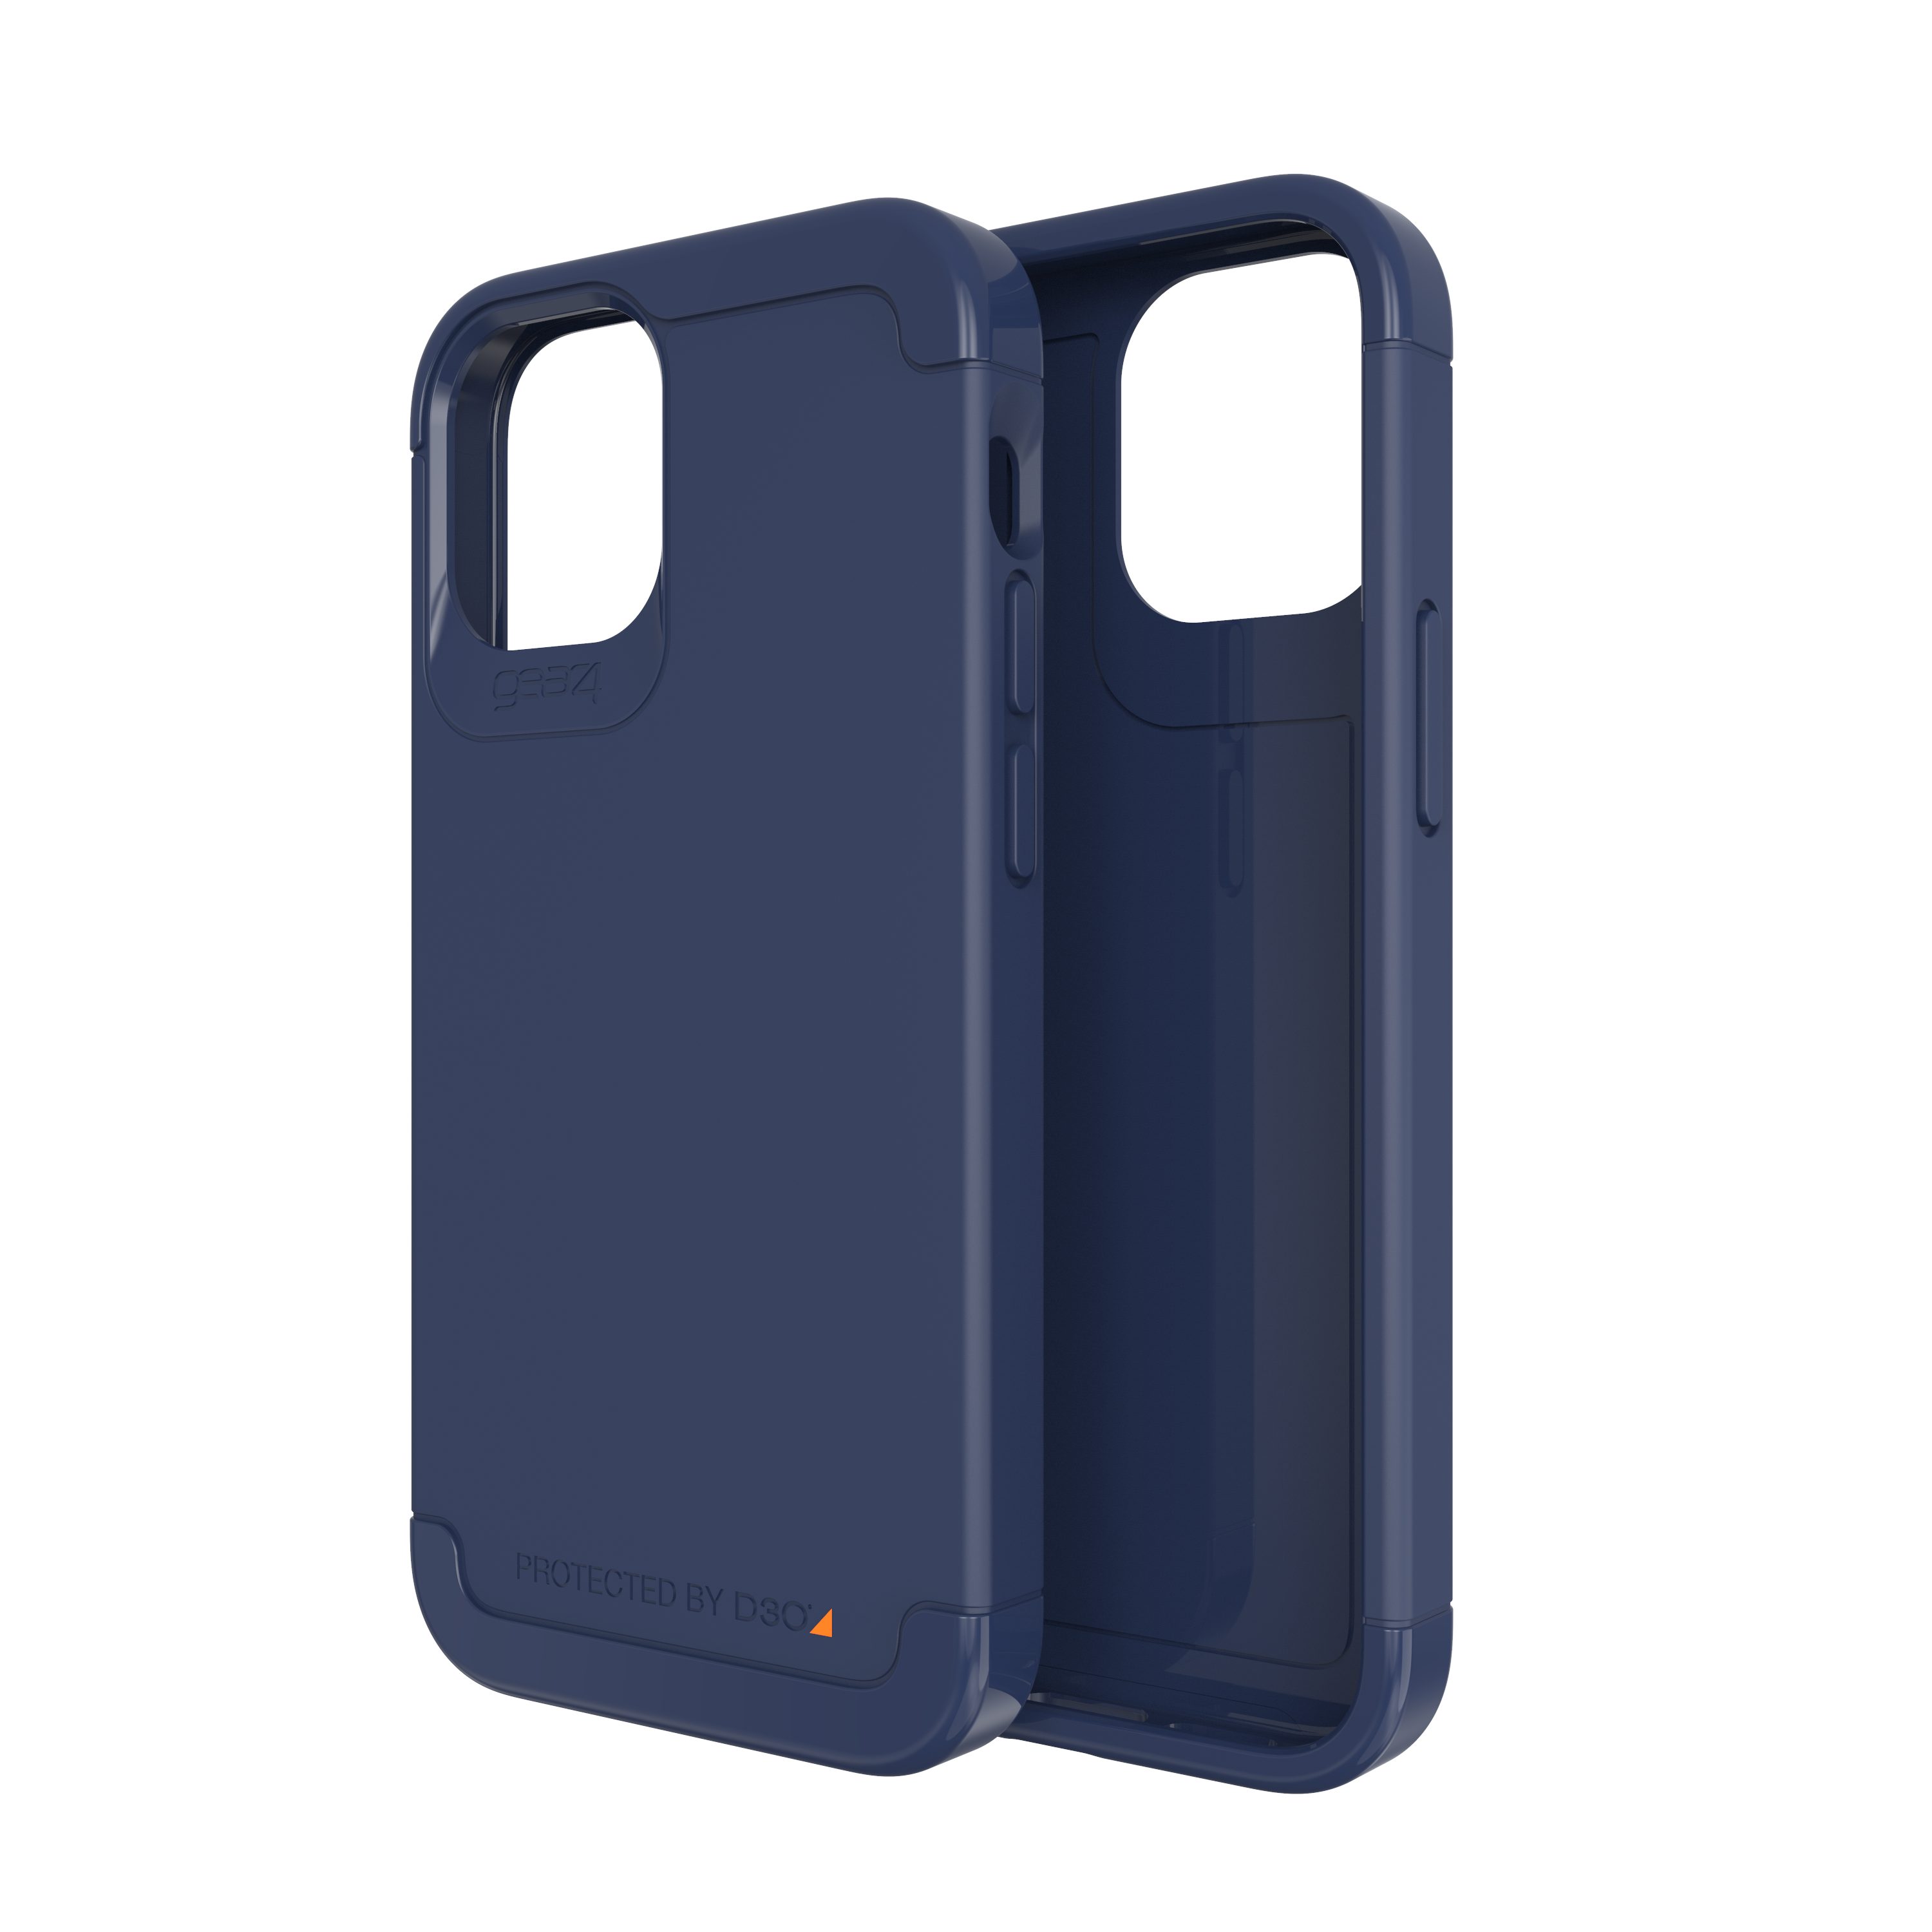 Gear4 Backcover Wembley Palette for iPhone 12 mini Navy Blue